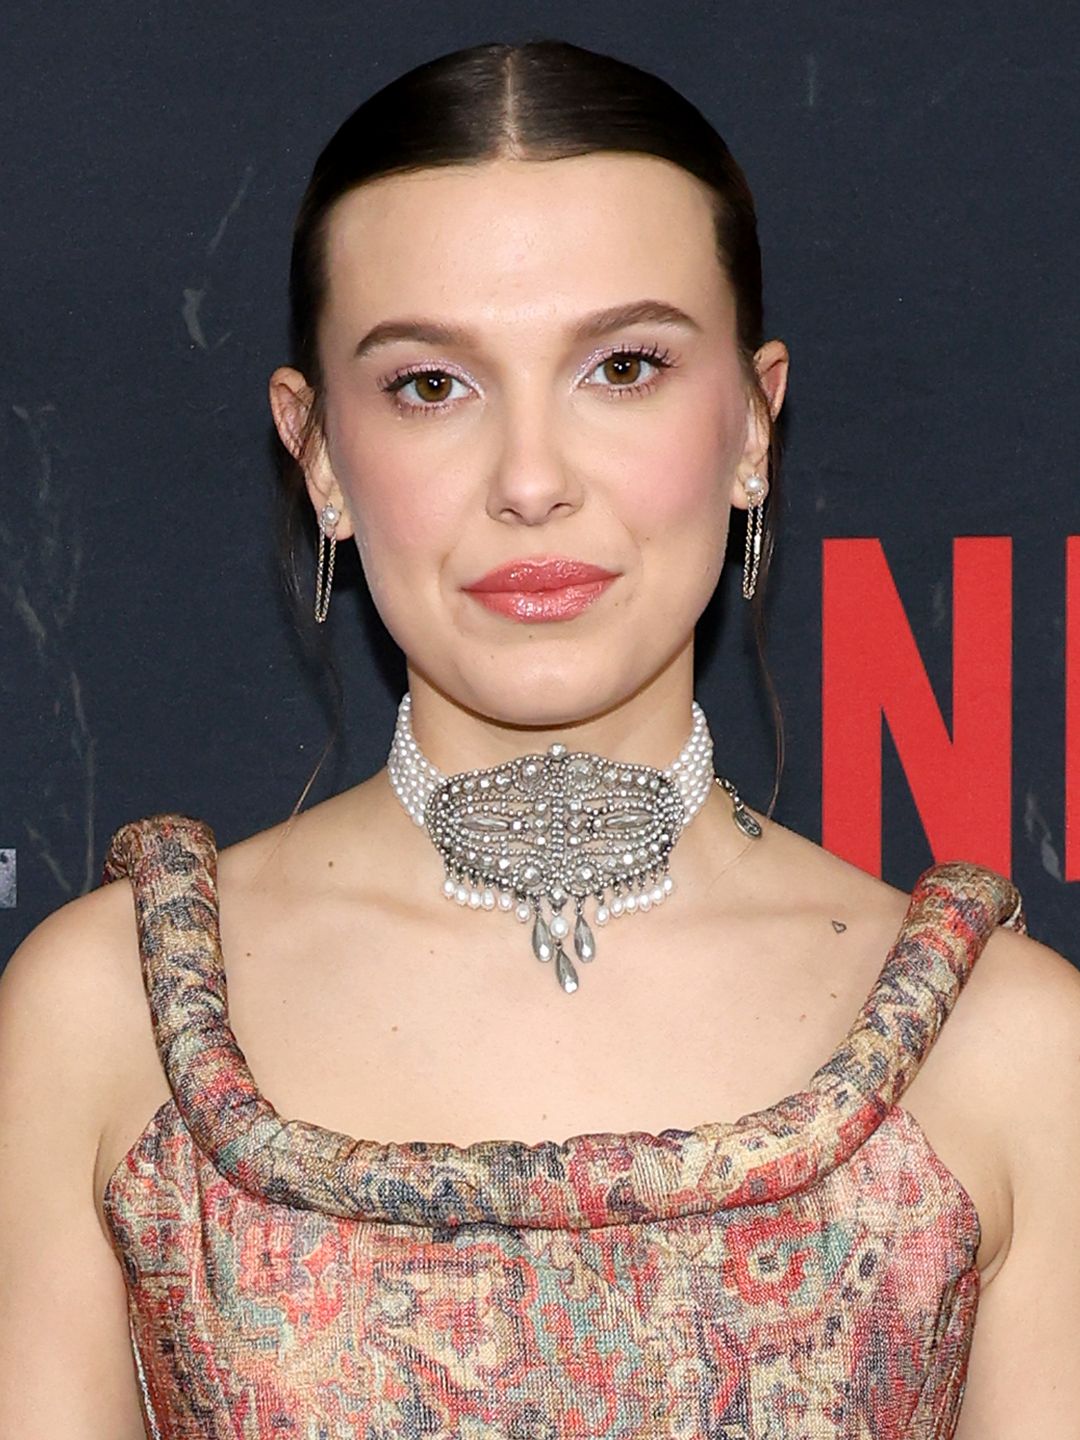 Millie Bobby Brown attends the "Damsel" photo call at The Plaza Hotel on February 29